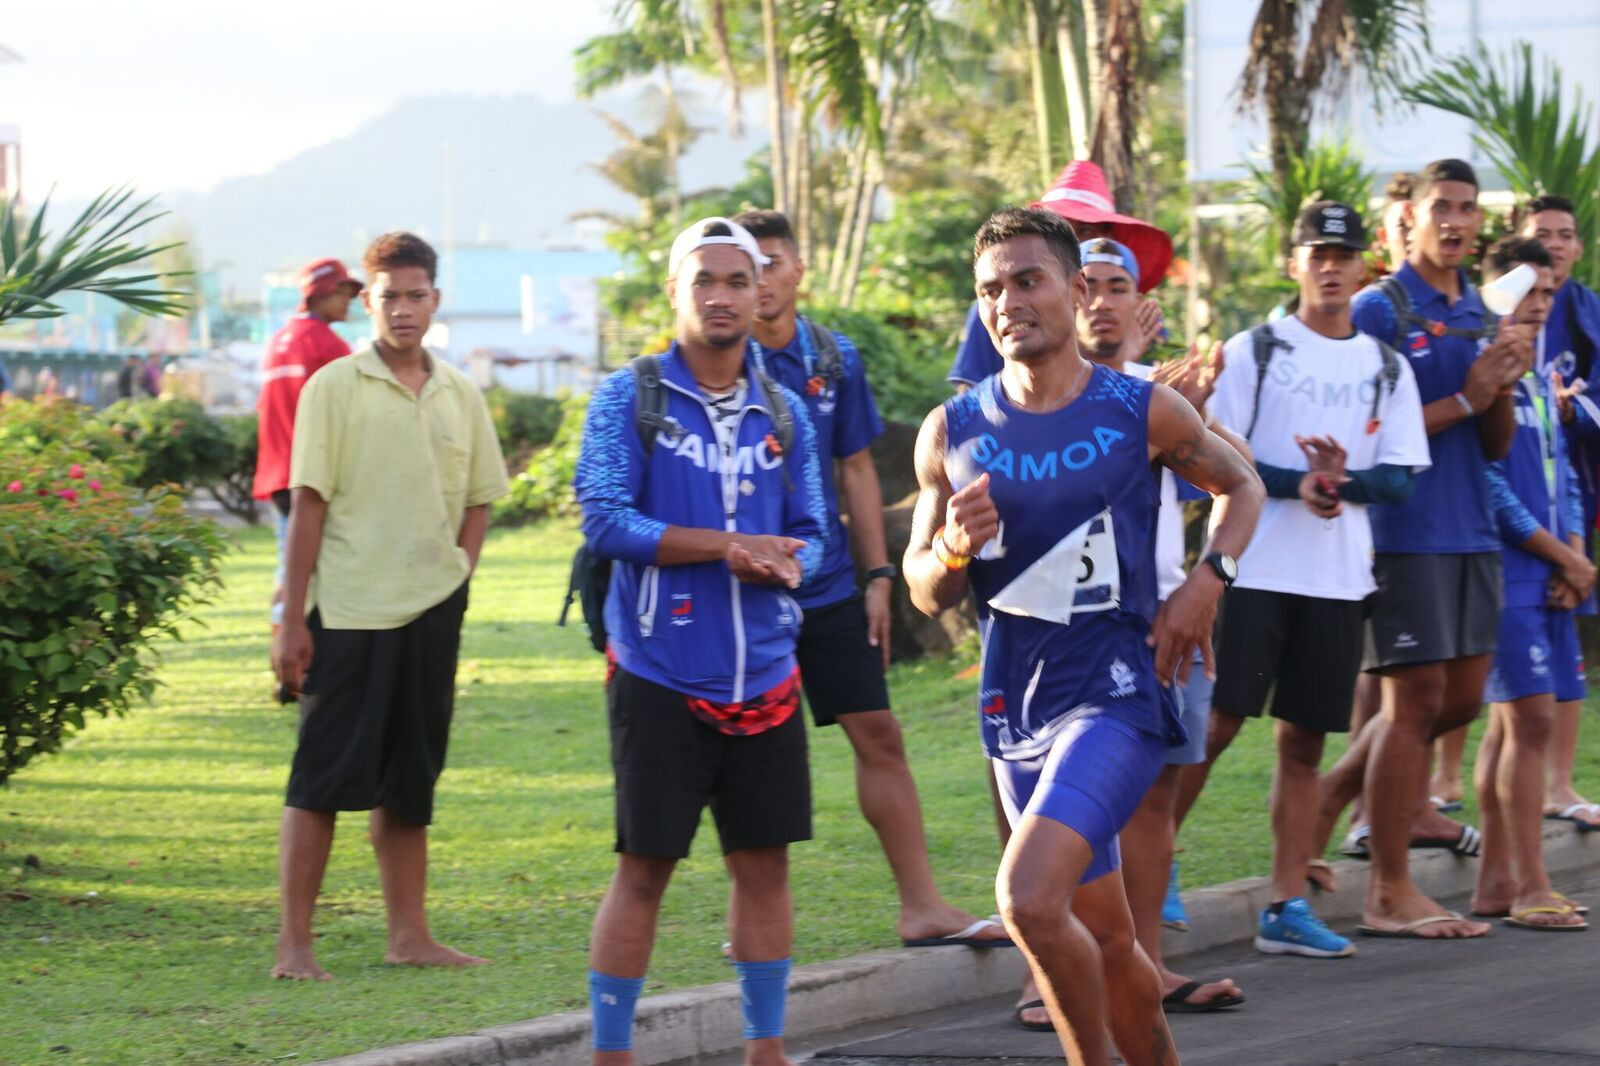 Samoa 2019: Day 12 of competition